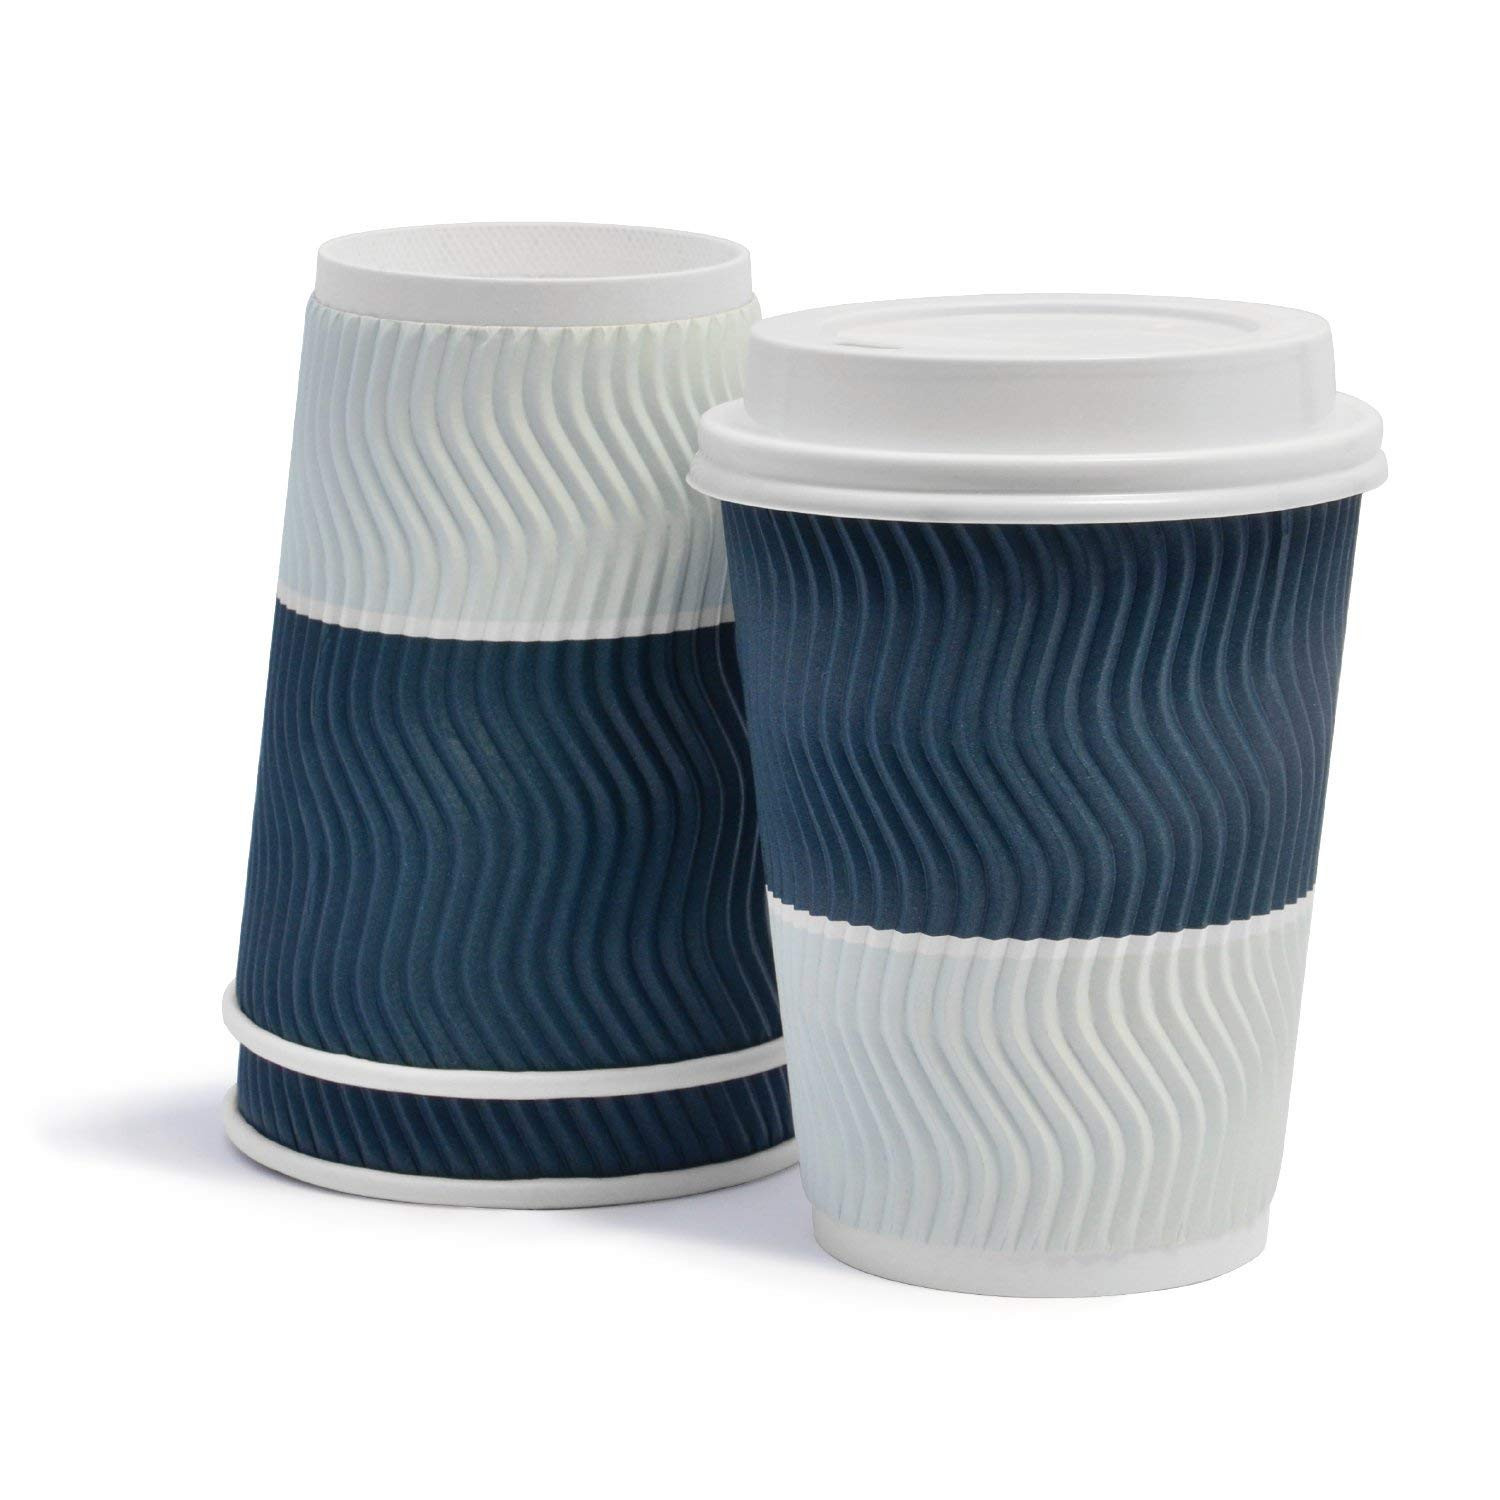 26 Best 10.5 Inch Cylinder Vases 2024 free download 10 5 inch cylinder vases of amazon com triple walled disposable coffee cups with lids wave intended for amazon com triple walled disposable coffee cups with lids wave insulted ripple design 